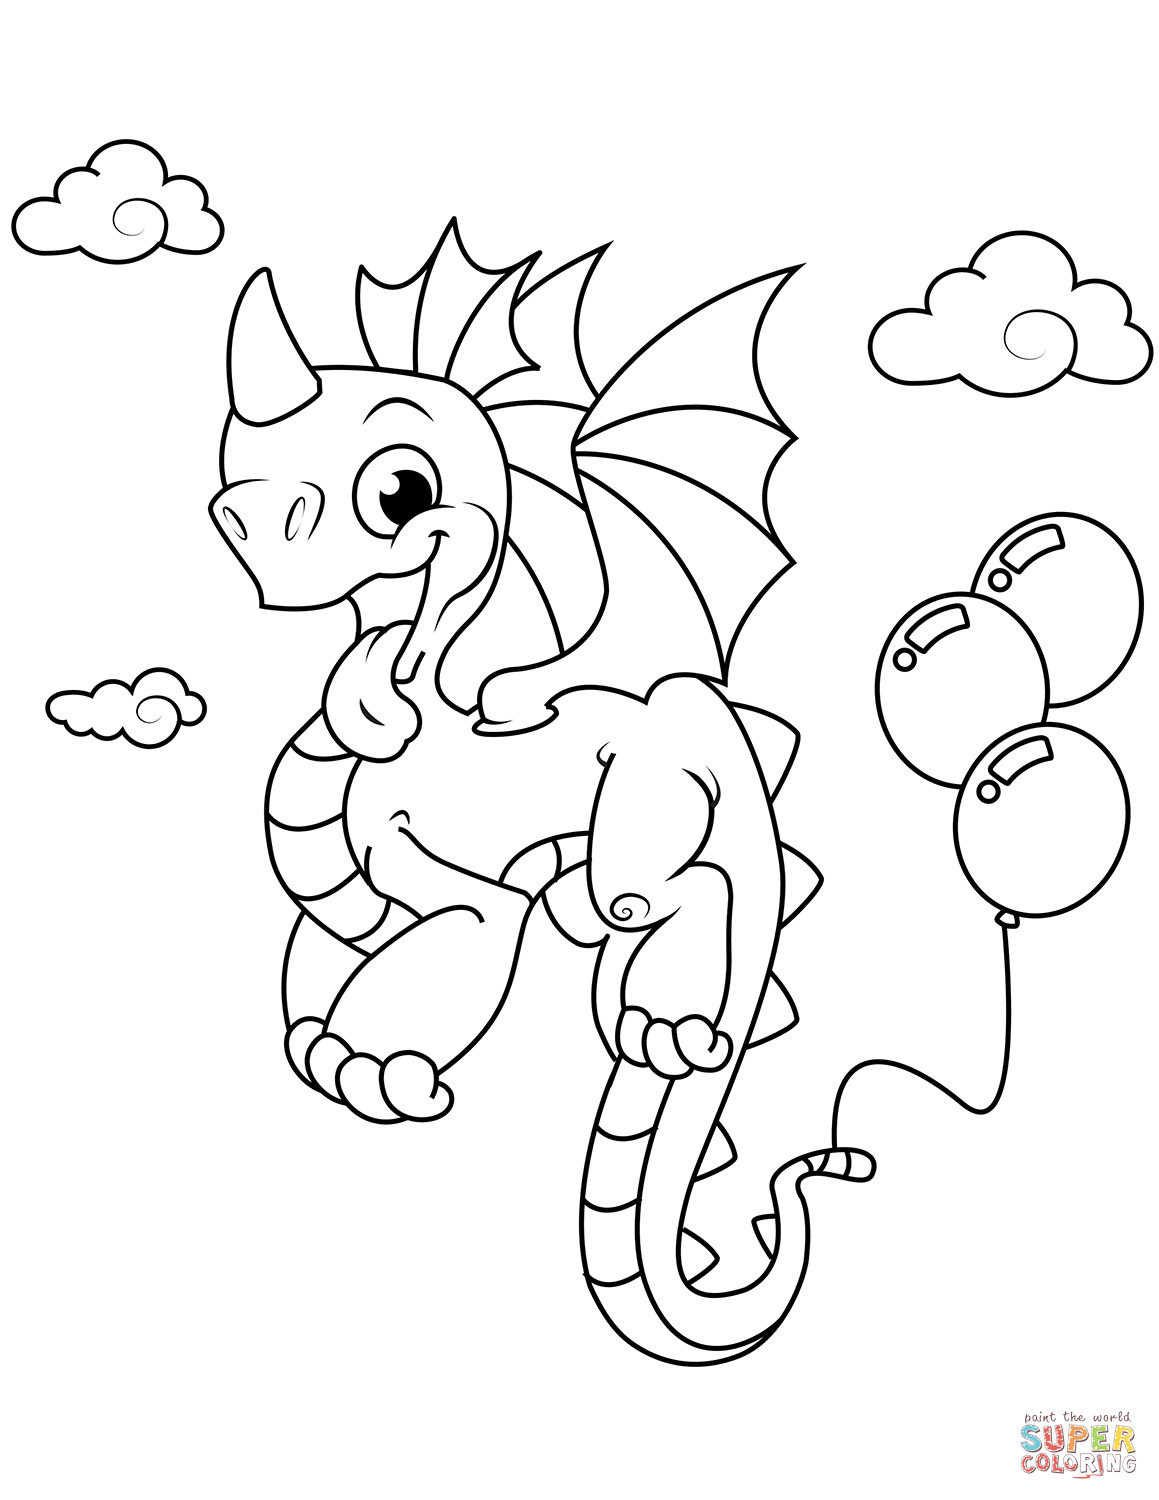 Free Printable Dragon Coloring Pages
 Cute Dragon with Balloons coloring page